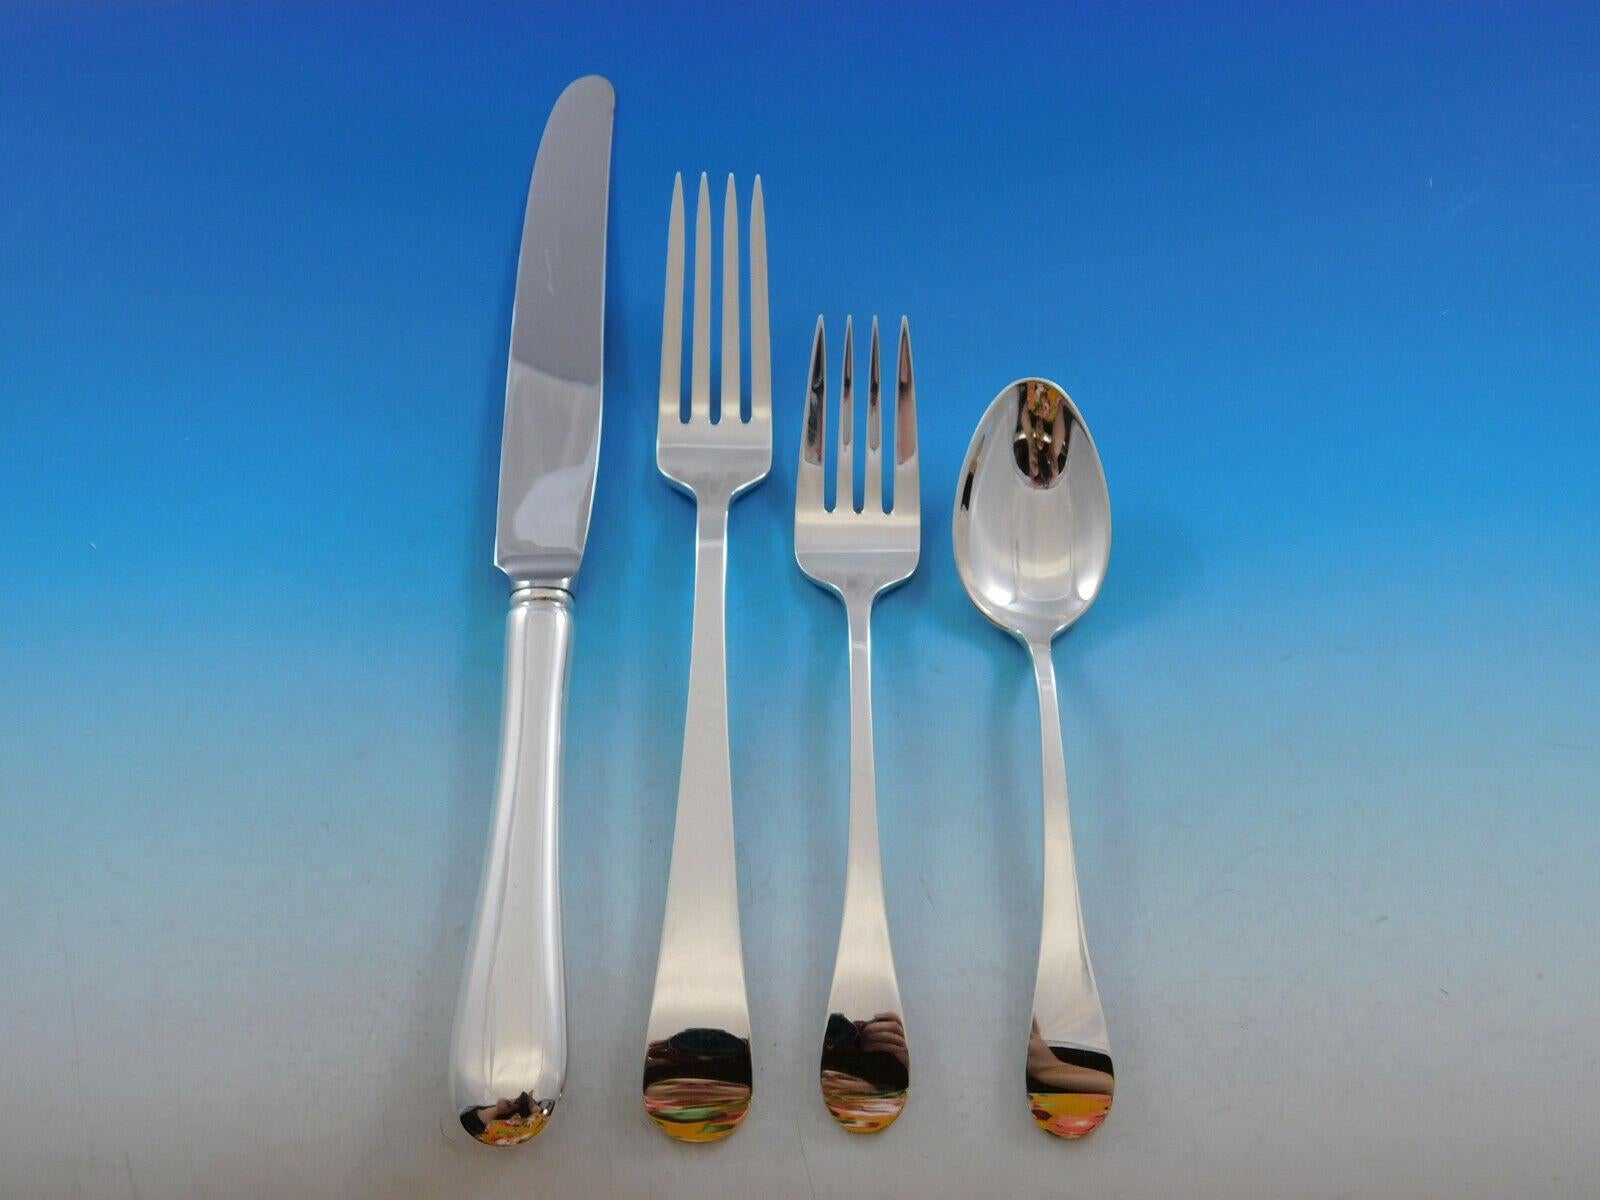 Dinner size Hannah Hull by Tuttle sterling silver flatware set, 92 pieces. All pieces are stamped with a date mark from Eisenhower's first term, for the years 1953-1956. This set includes:

12 dinner size knives, 9 1/2